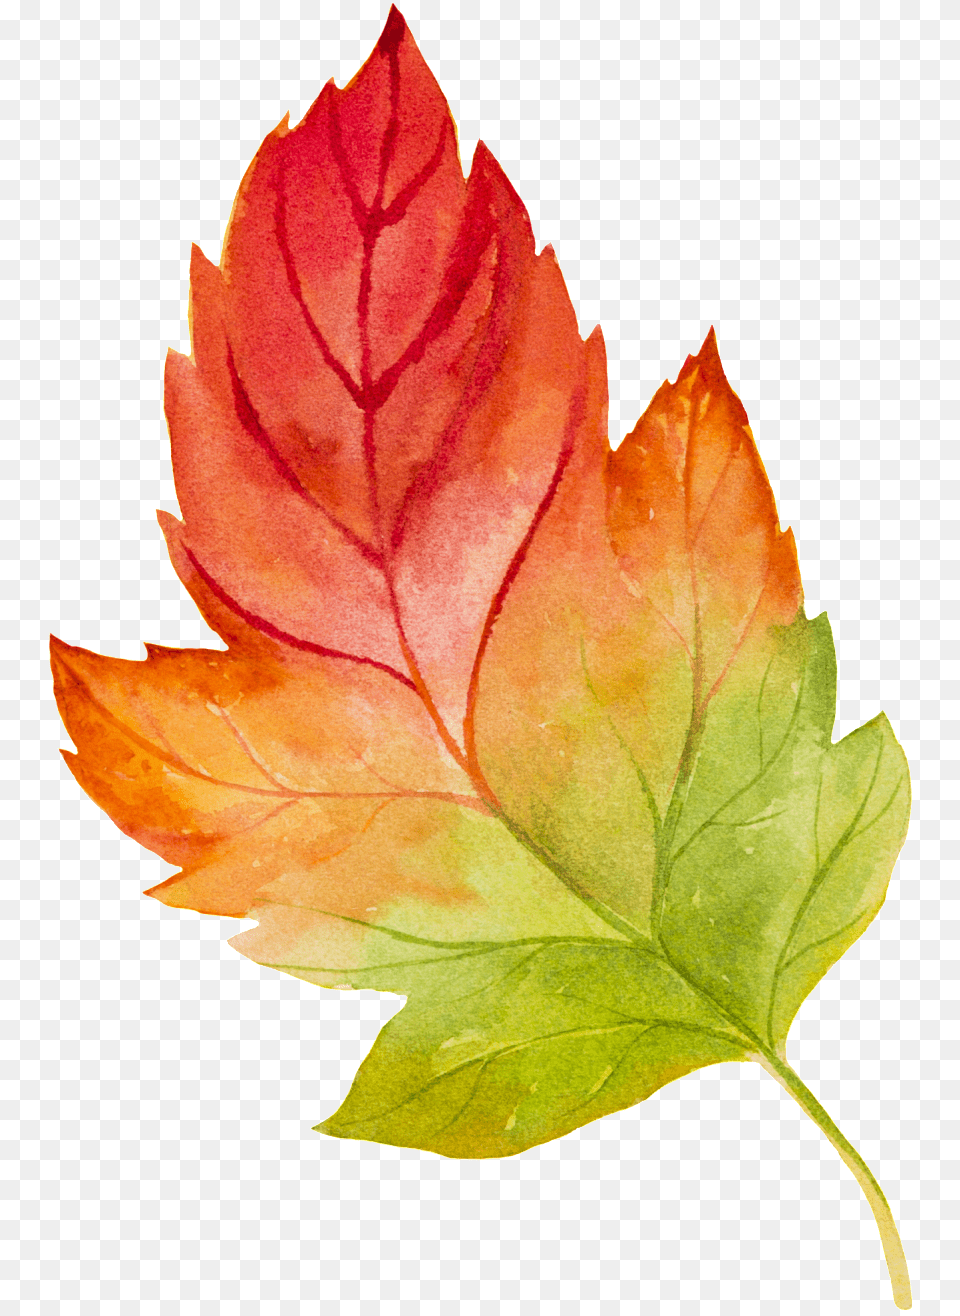 Graphics Is Hand Painted Watercolor Maple Leaf Watercolour Transparent, Plant, Tree, Maple Leaf Png